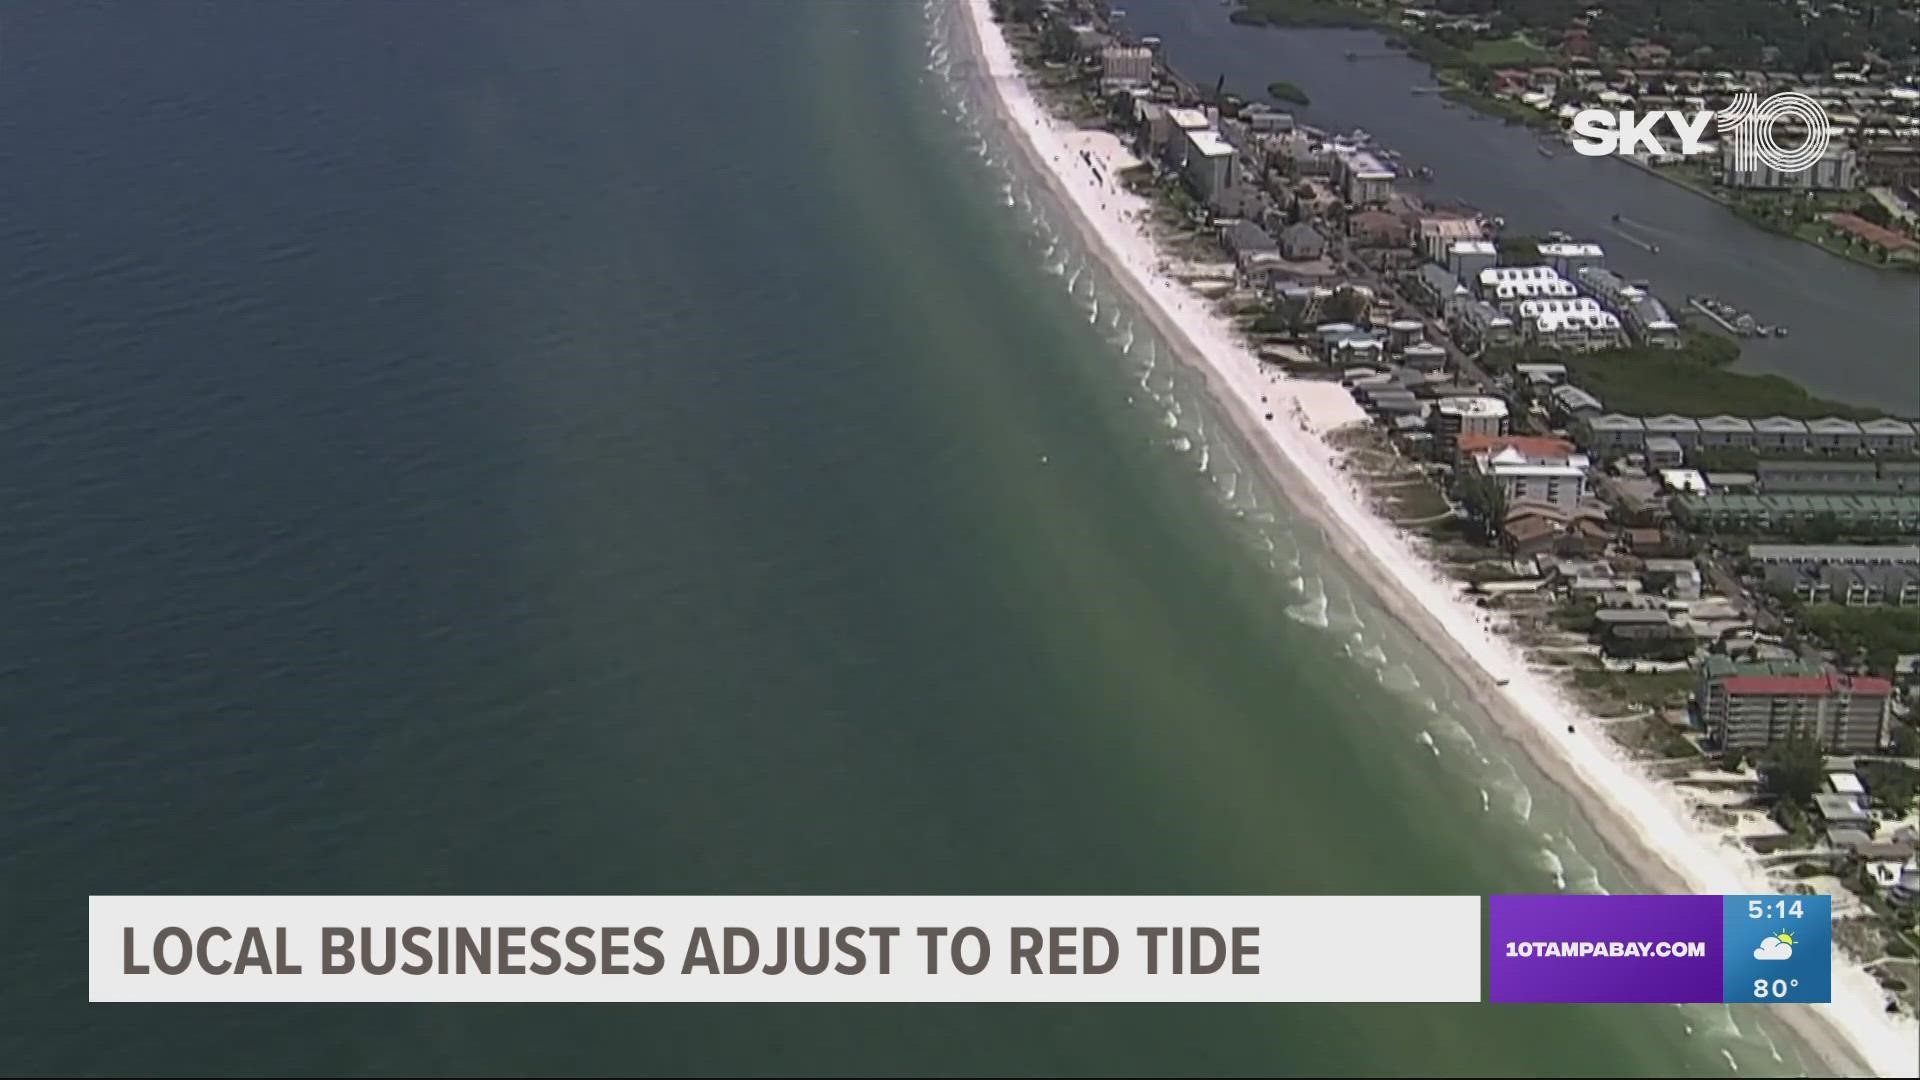 Red tide has been detected at high and medium levels down the coast of southwest Florida, and it can often impact local business.